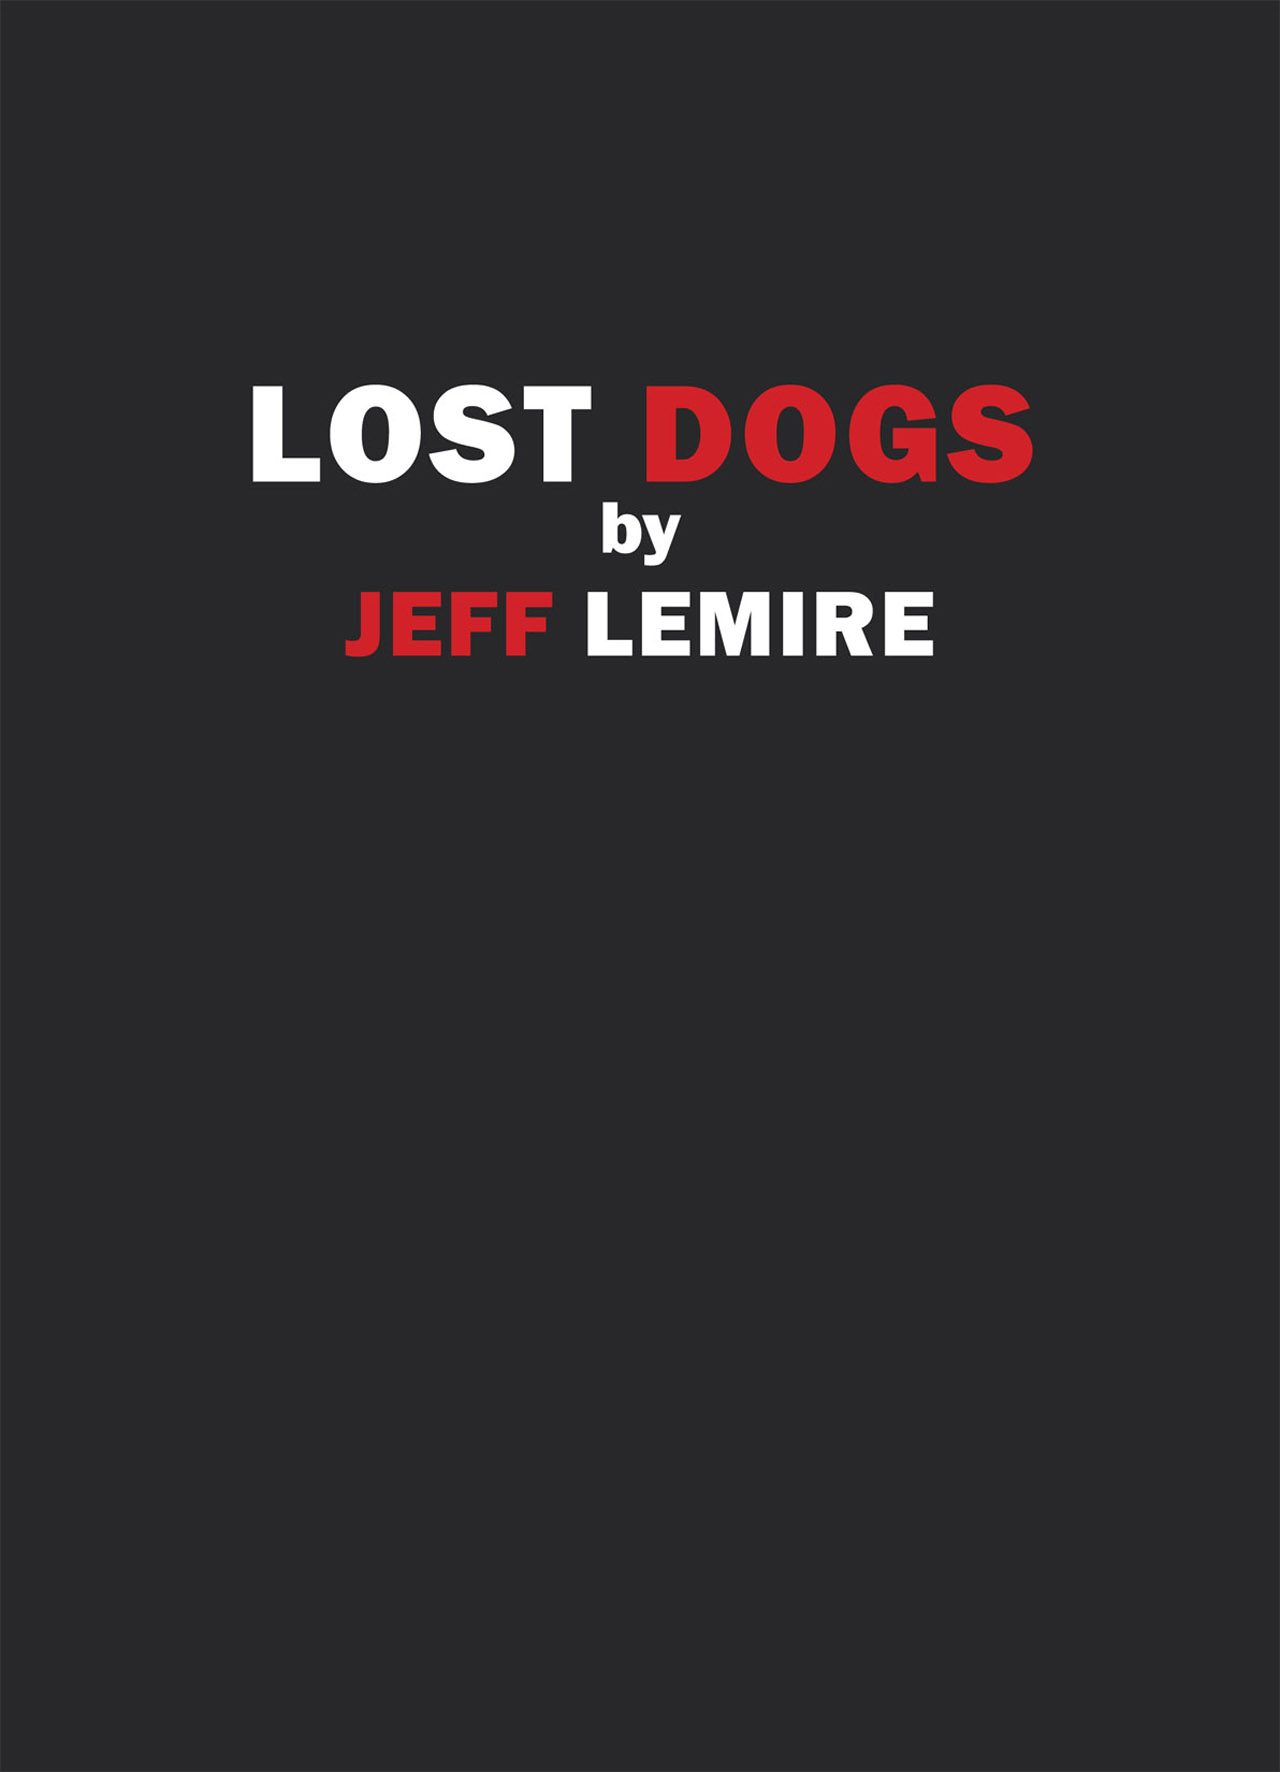 Read online Lost Dogs comic -  Issue # TPB - 2